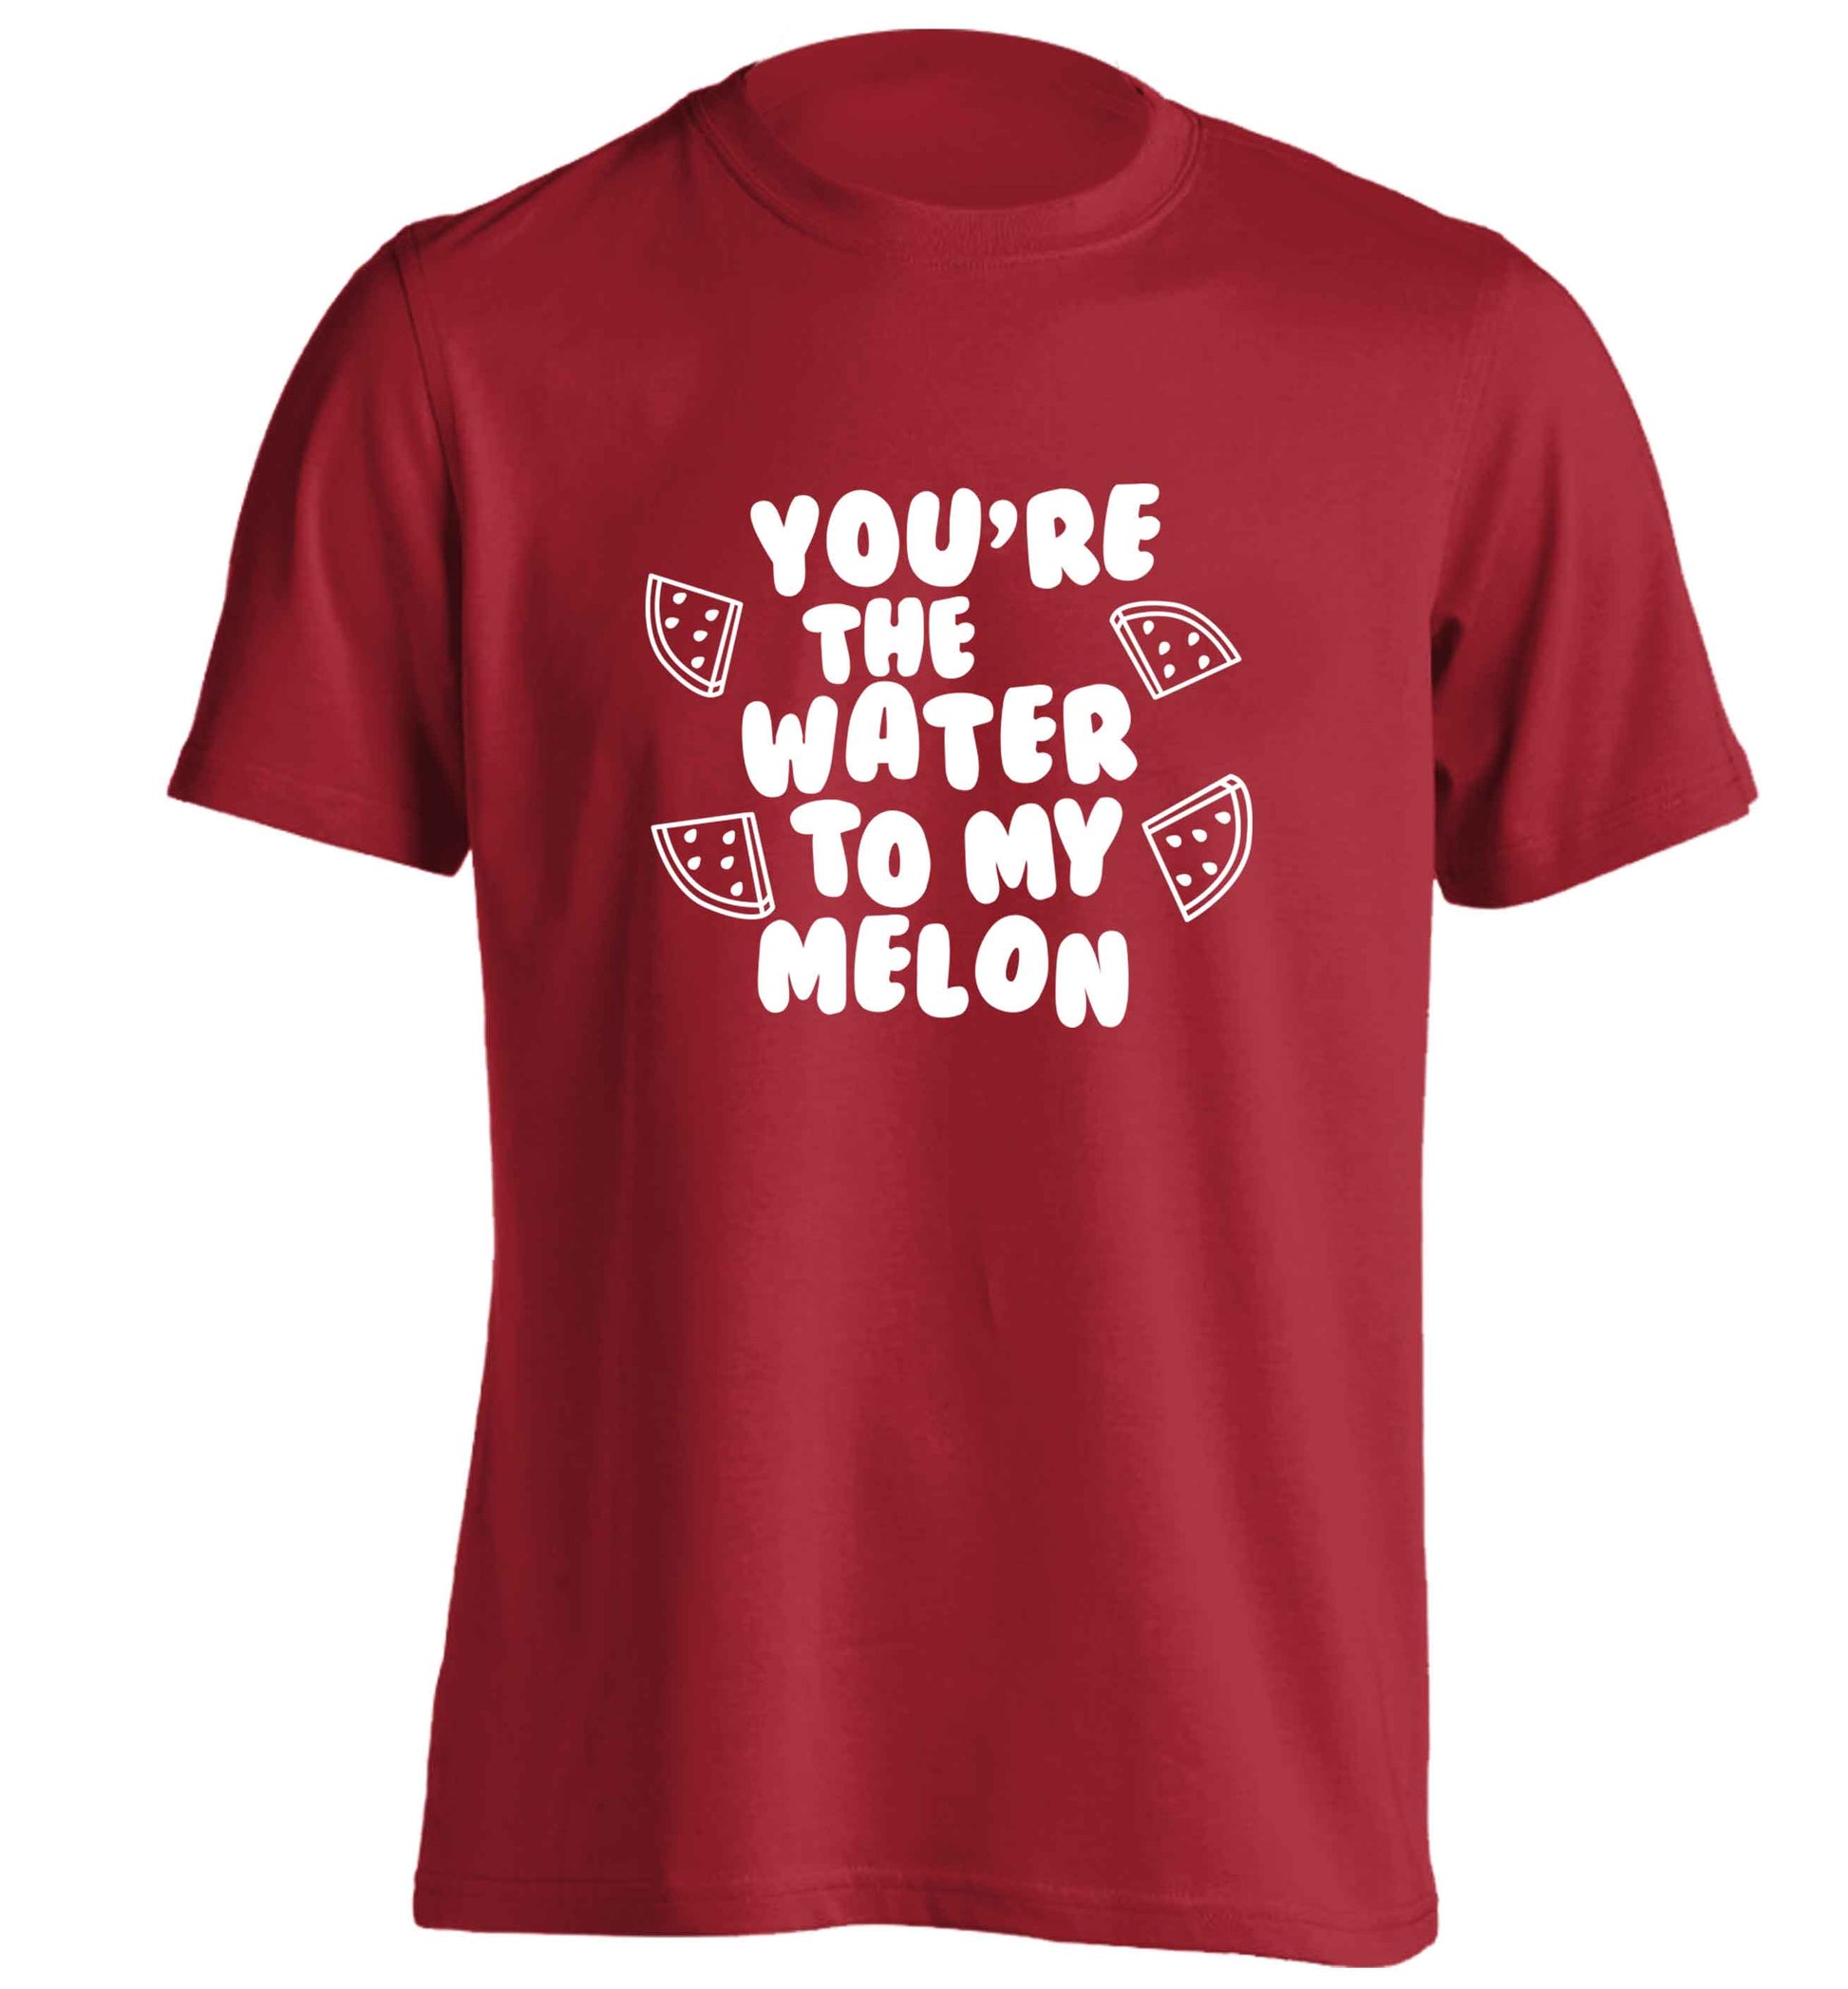 You're the water to my melon adults unisex red Tshirt 2XL